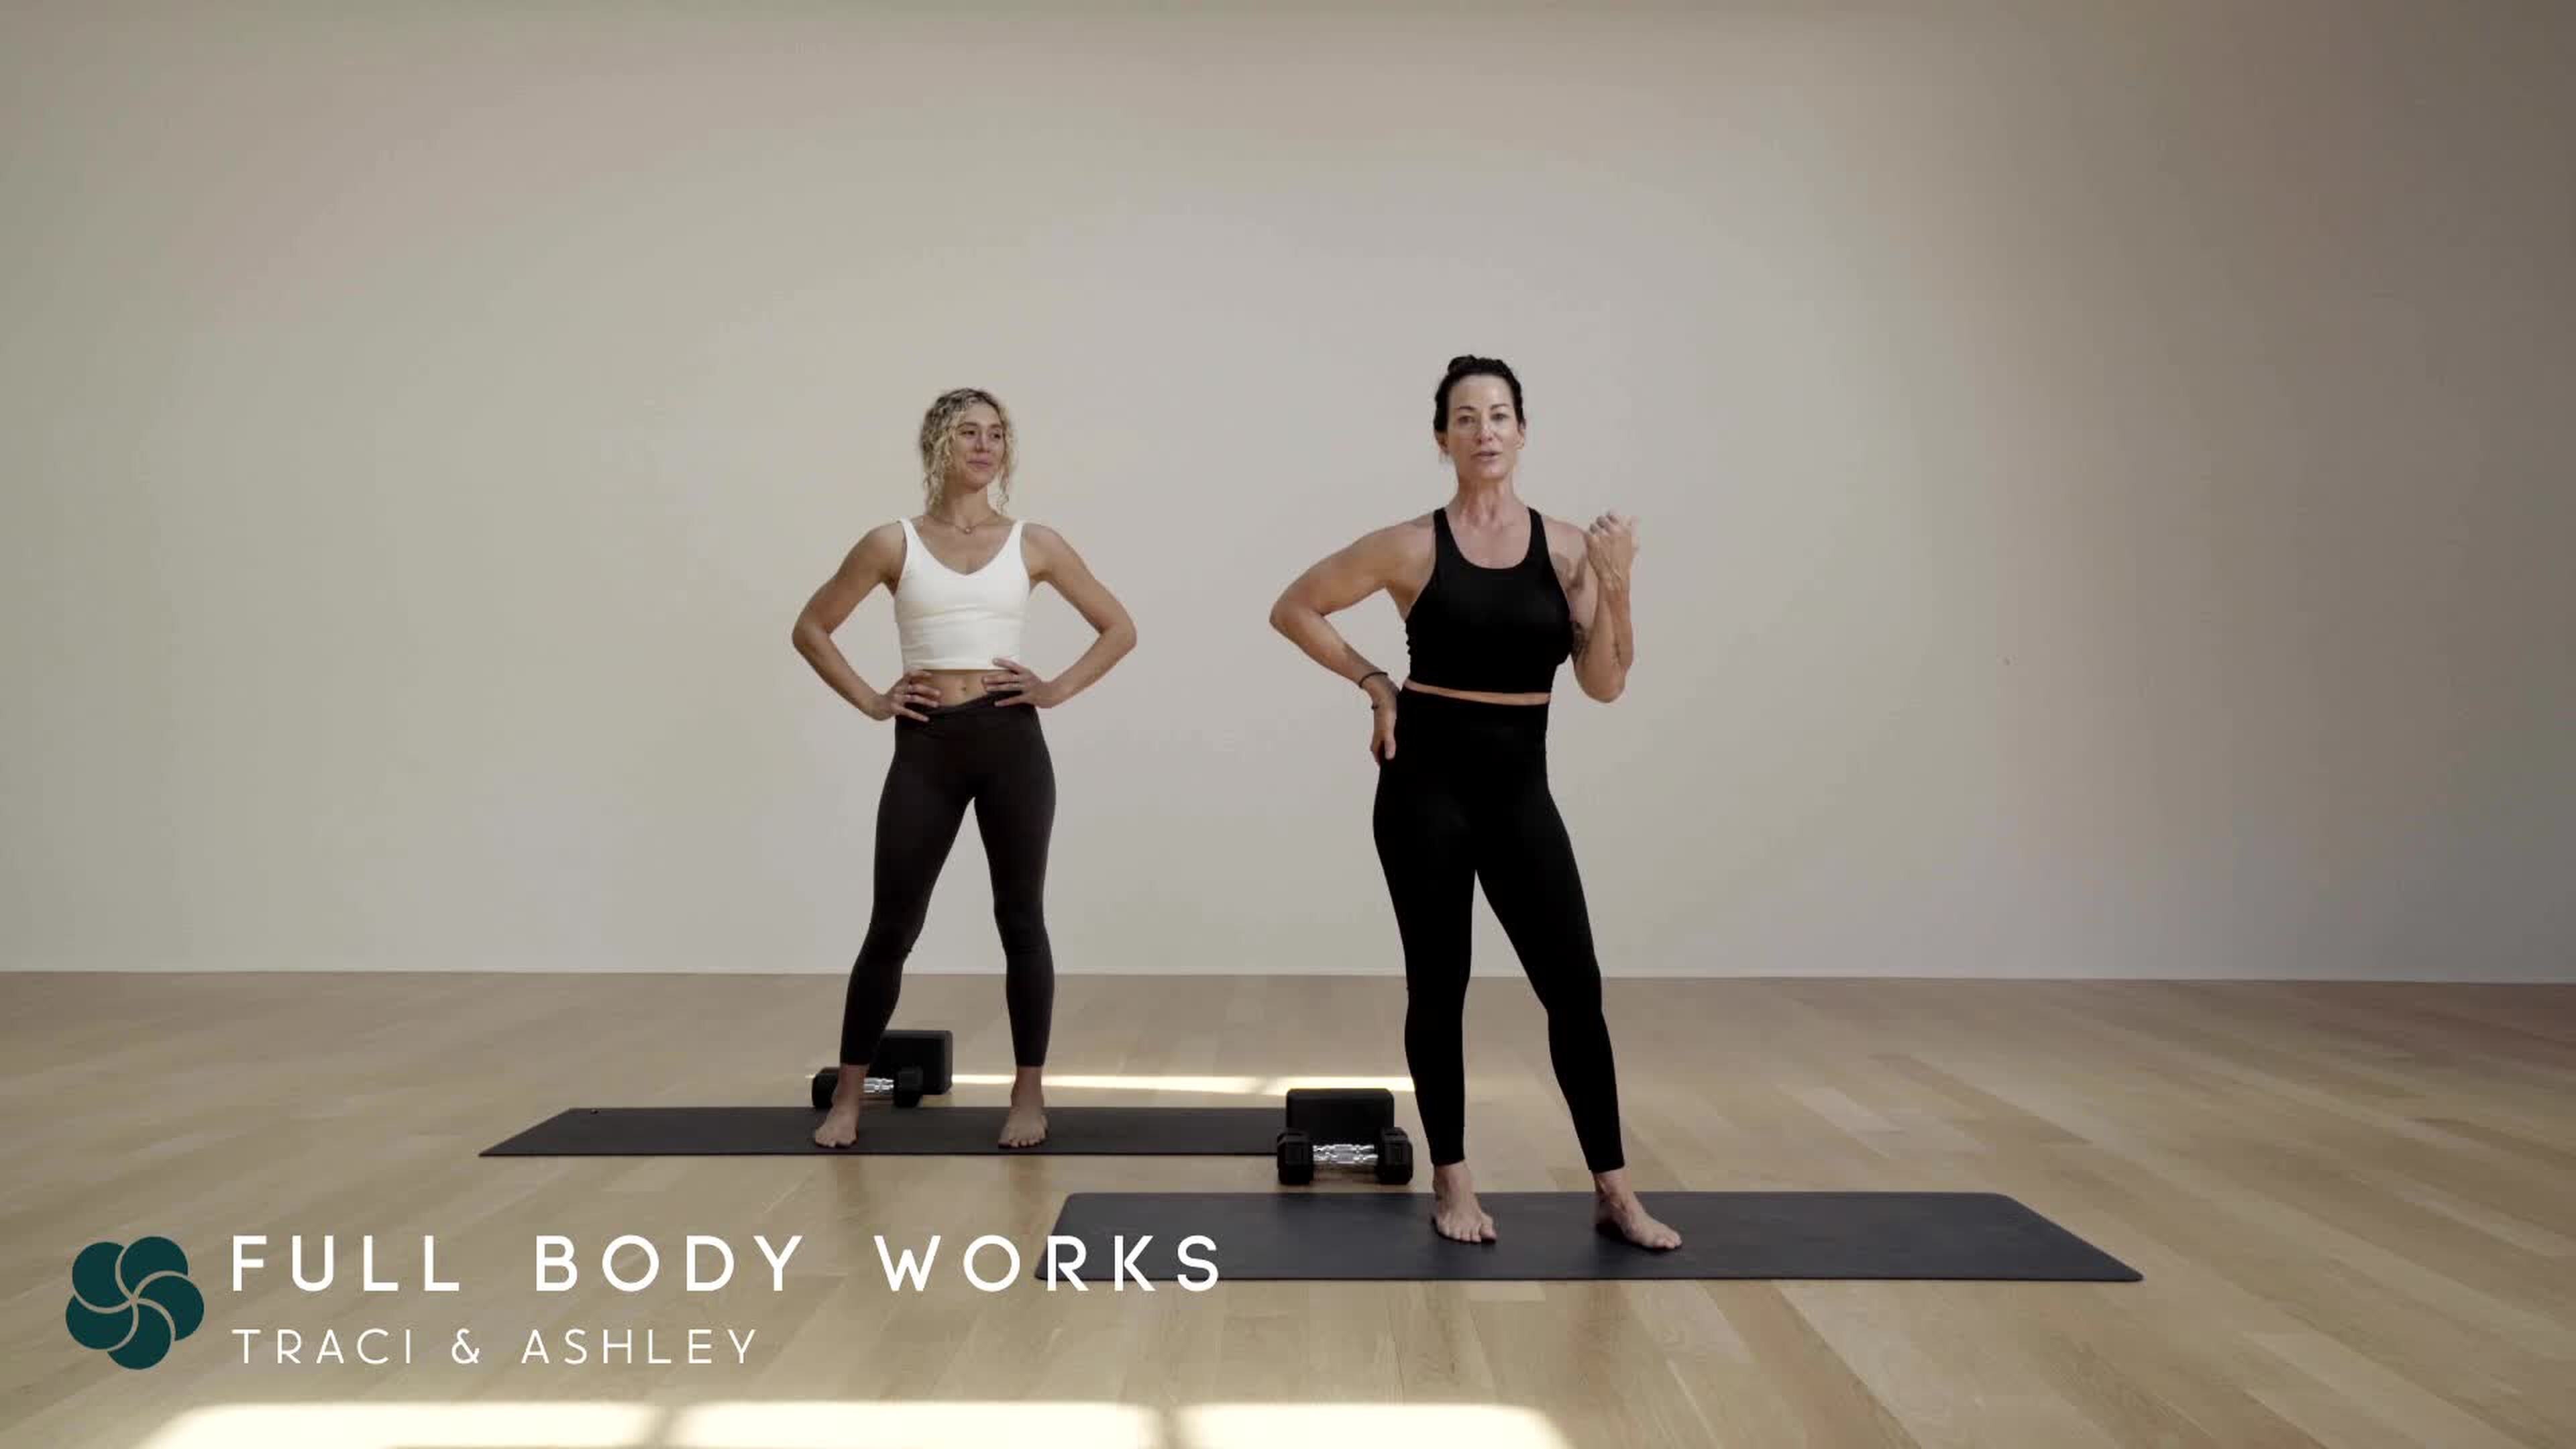 30 min- Full Body Works – Tracy Bauer